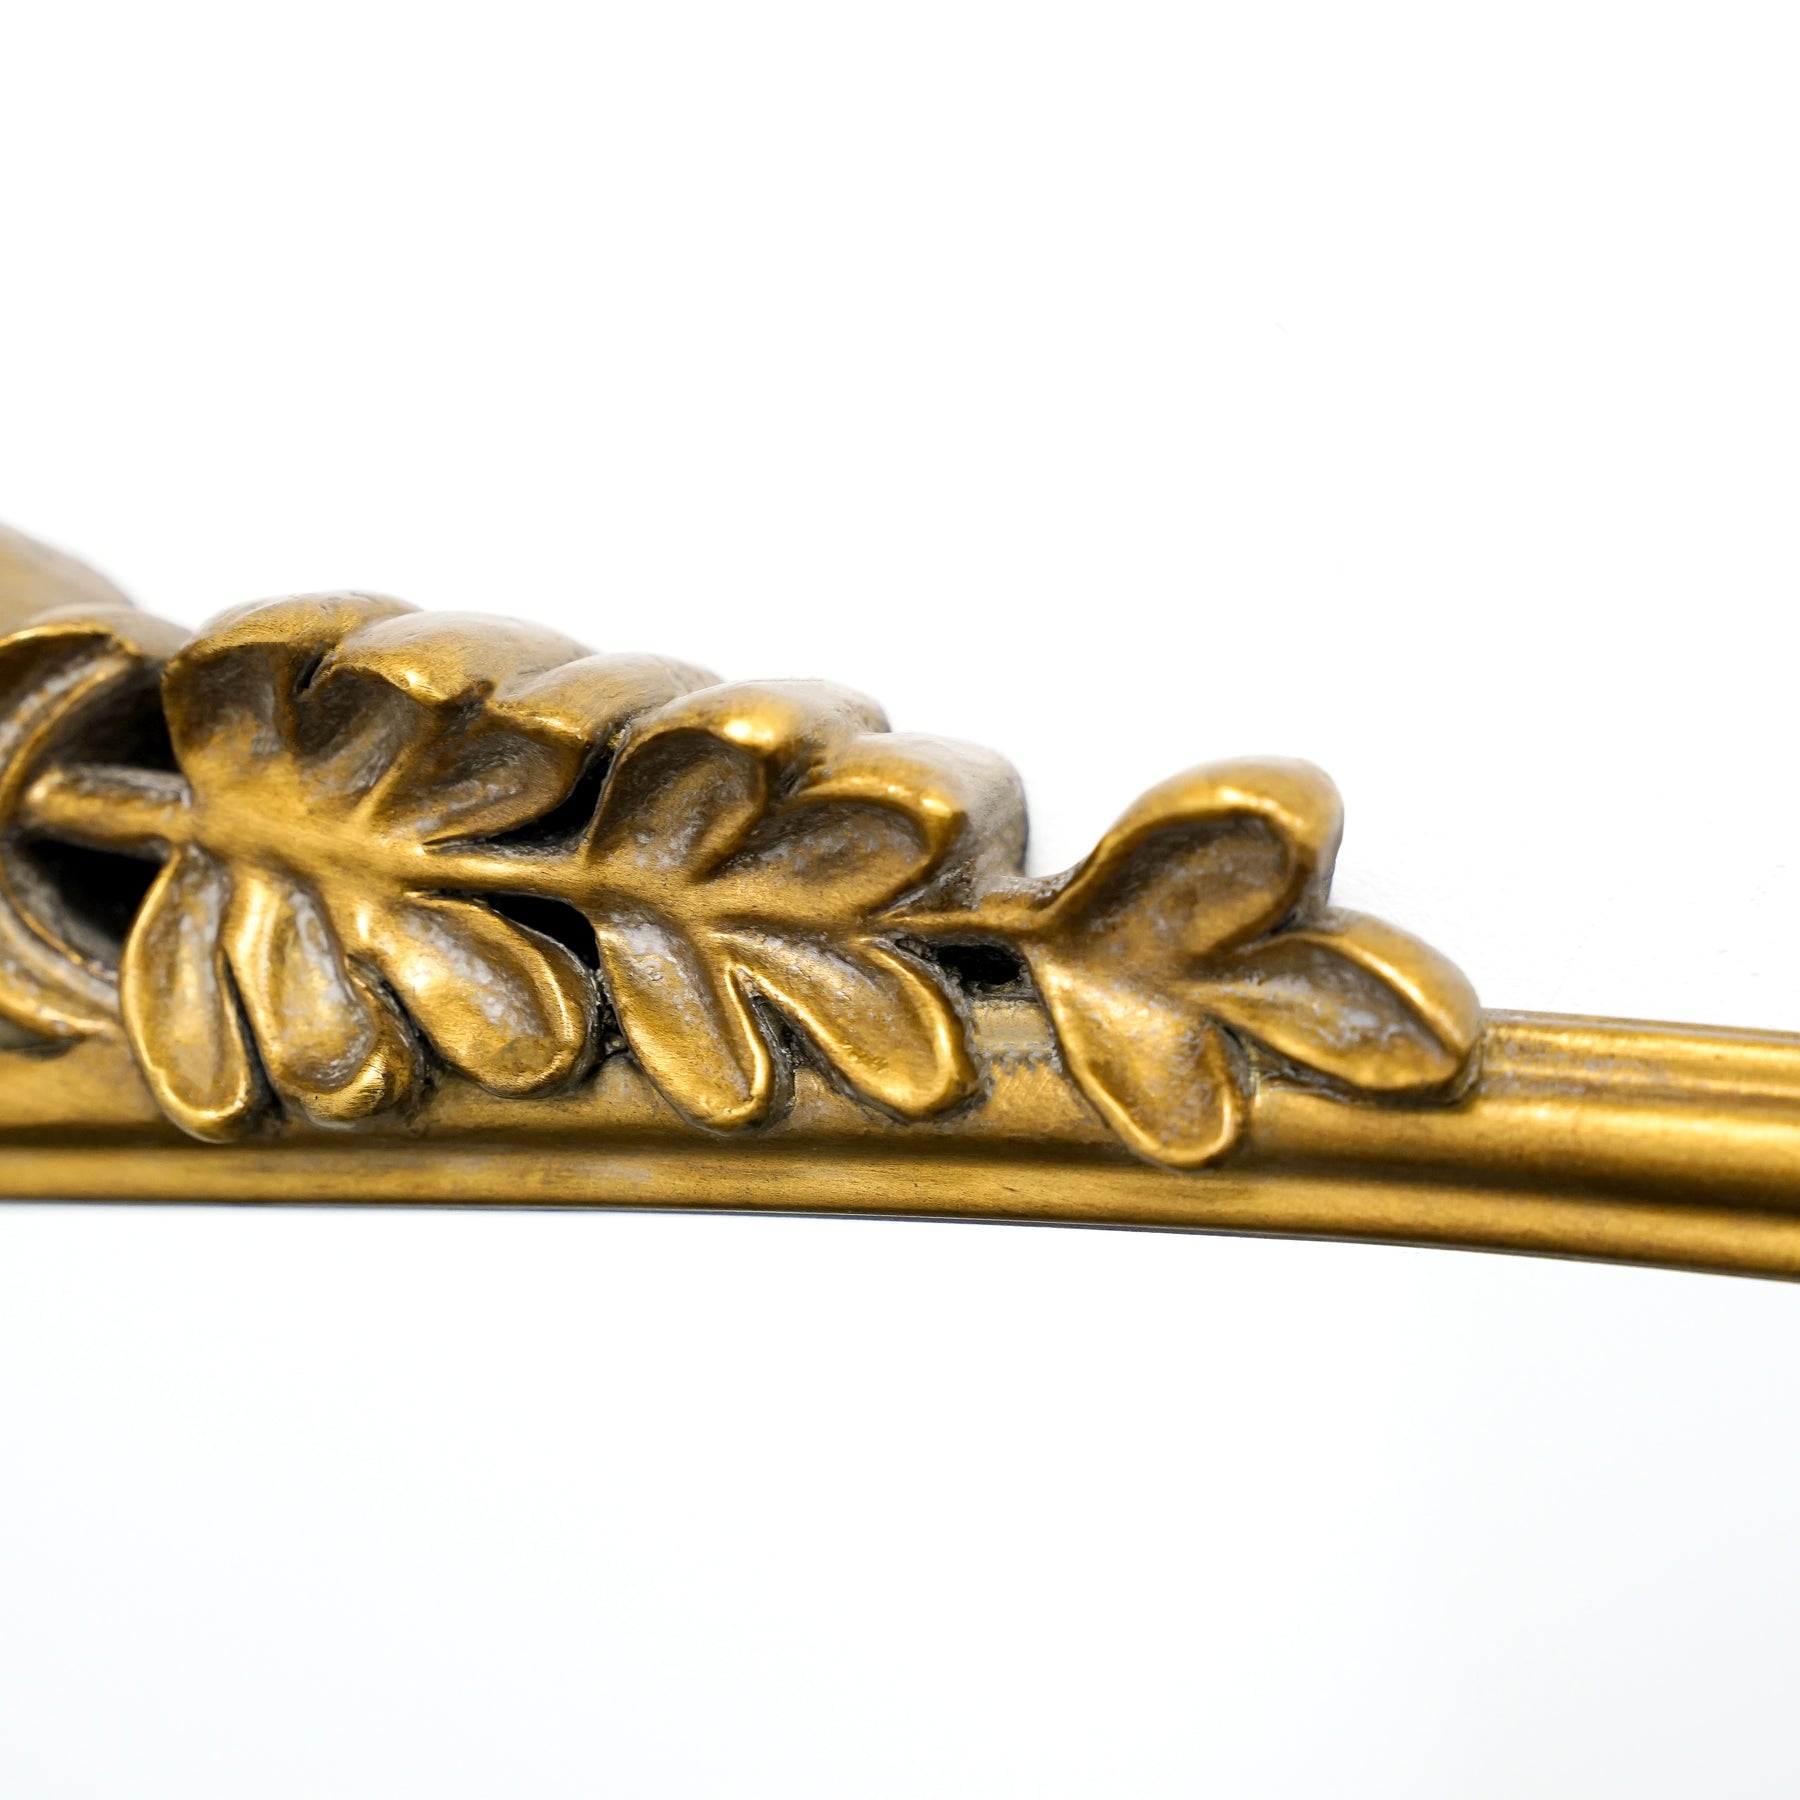 Detail shot of Gold Arched Metal Overmantle Mirror top crest